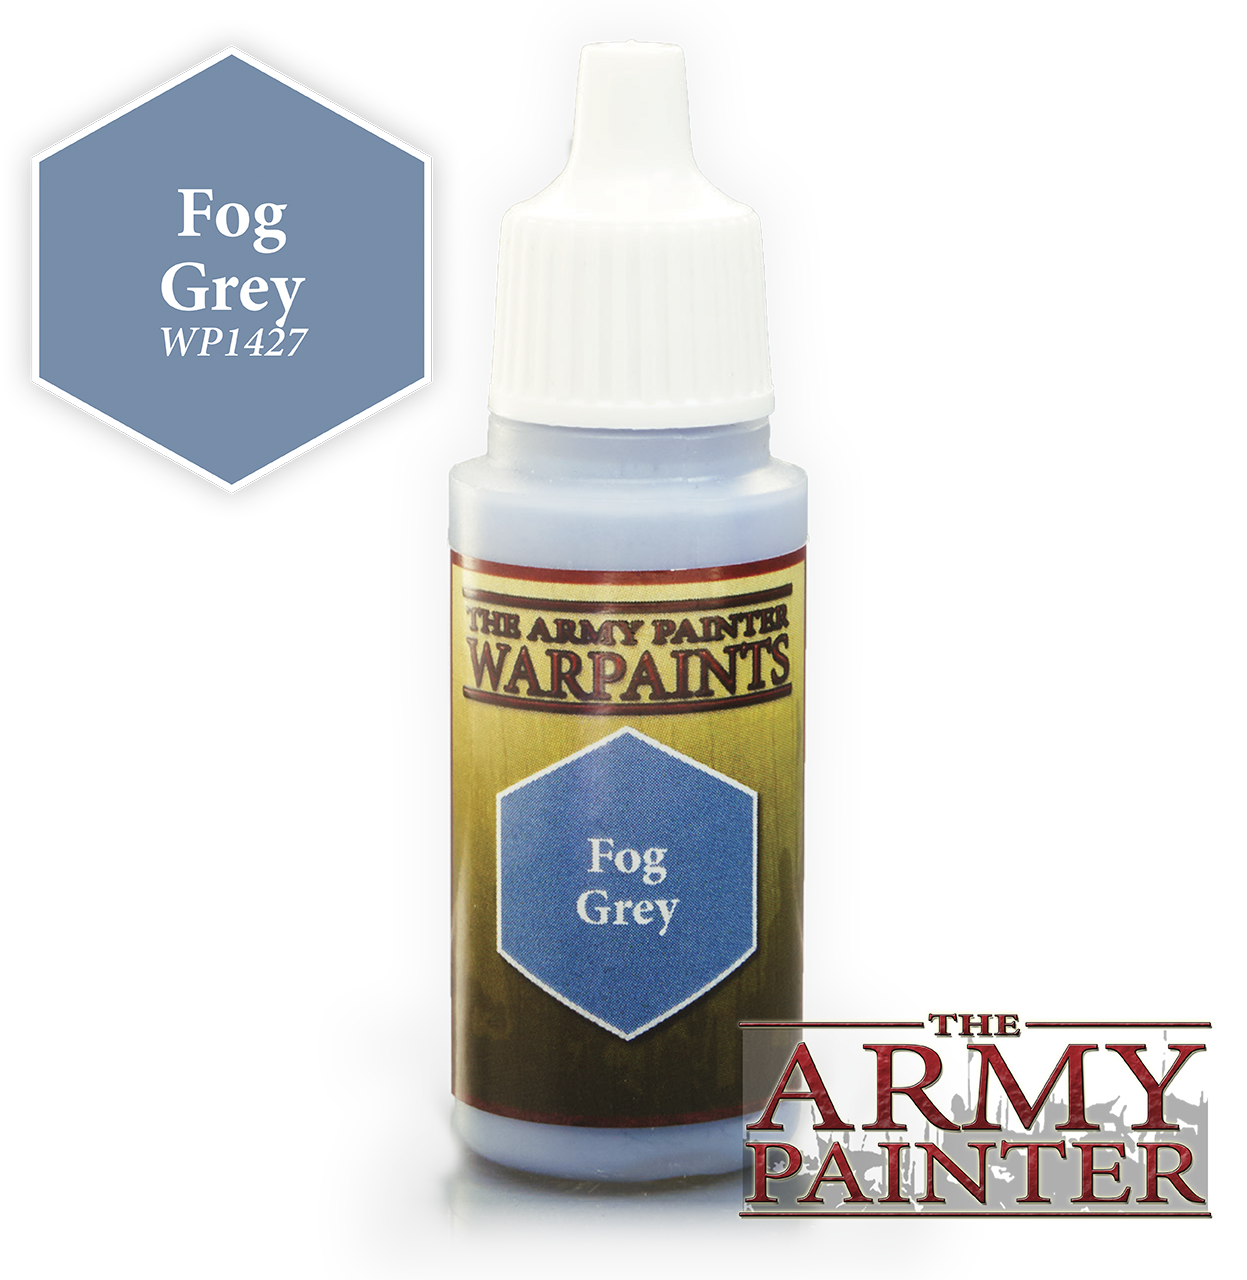 The ARMY PAINTER: Acrylics Warpaint - Fog Grey | Tacoma Games